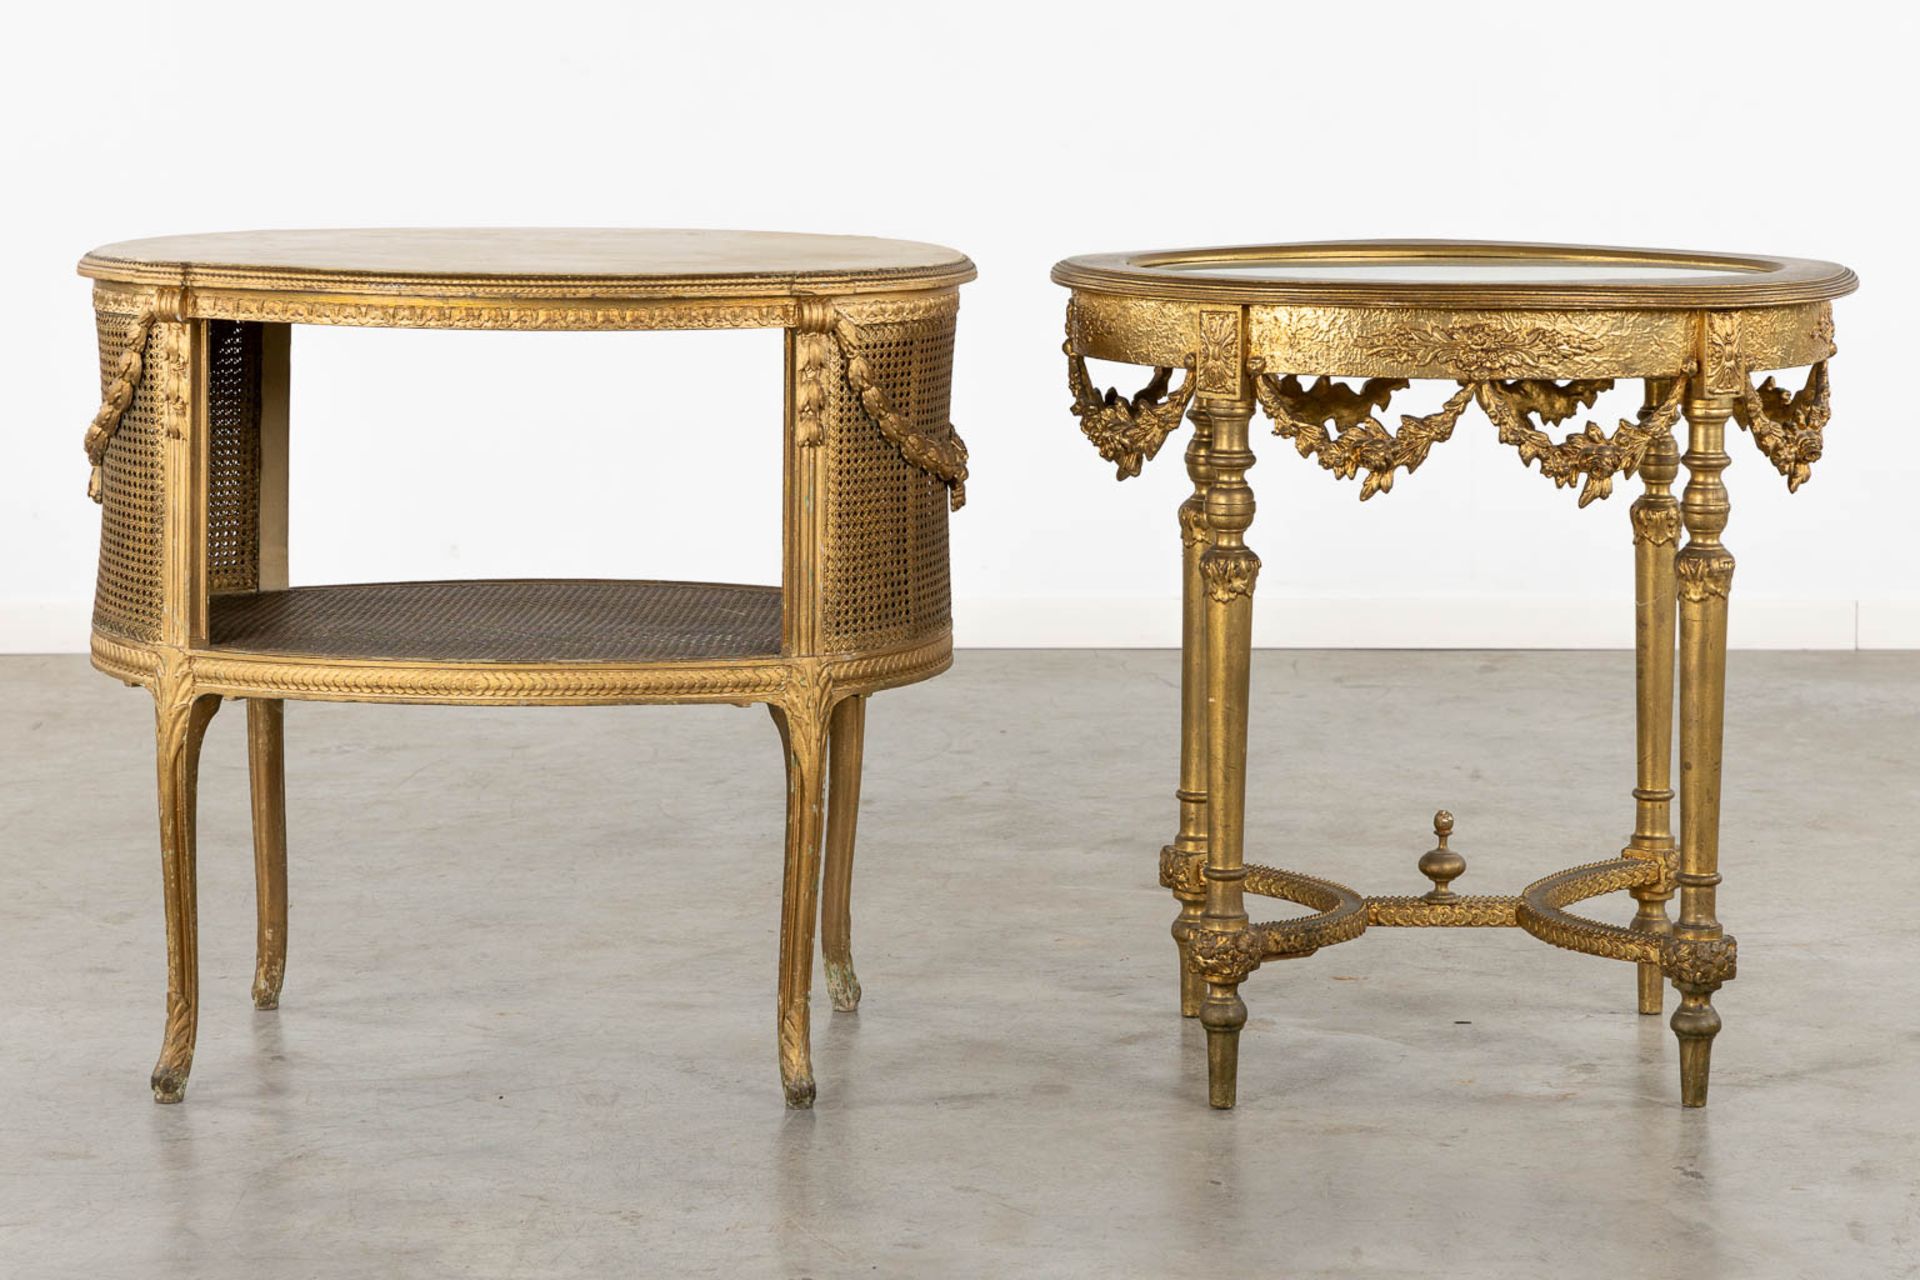 Two side tables, Two chairs, sculptured wood in Louis XVI style. Circa 1900. (L:57 x W:81 x H:75 cm) - Bild 5 aus 18